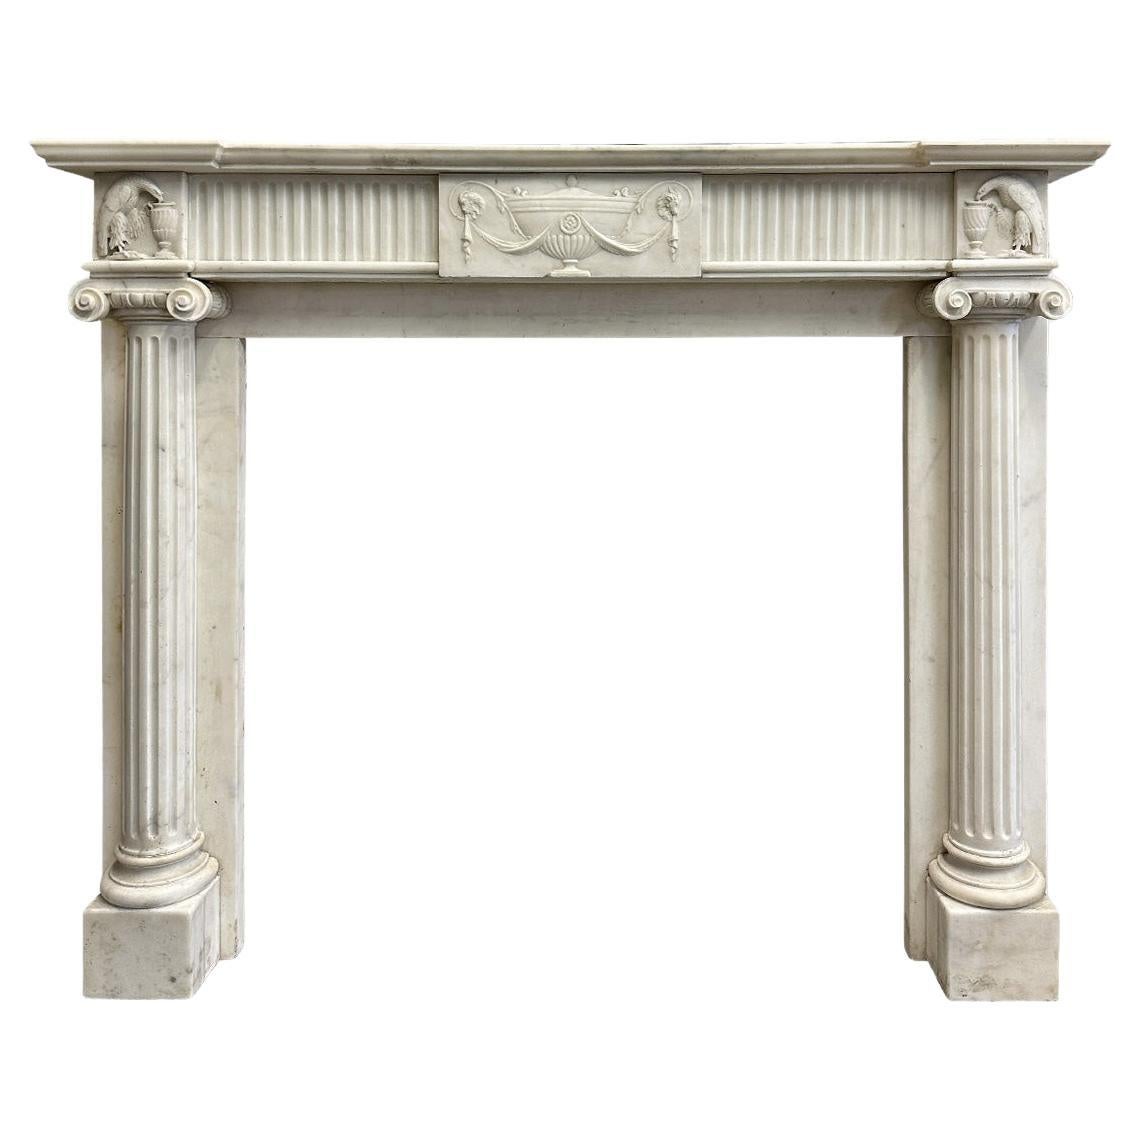 An English Regency Statuary White Marble Columned Fireplace mantel  For Sale